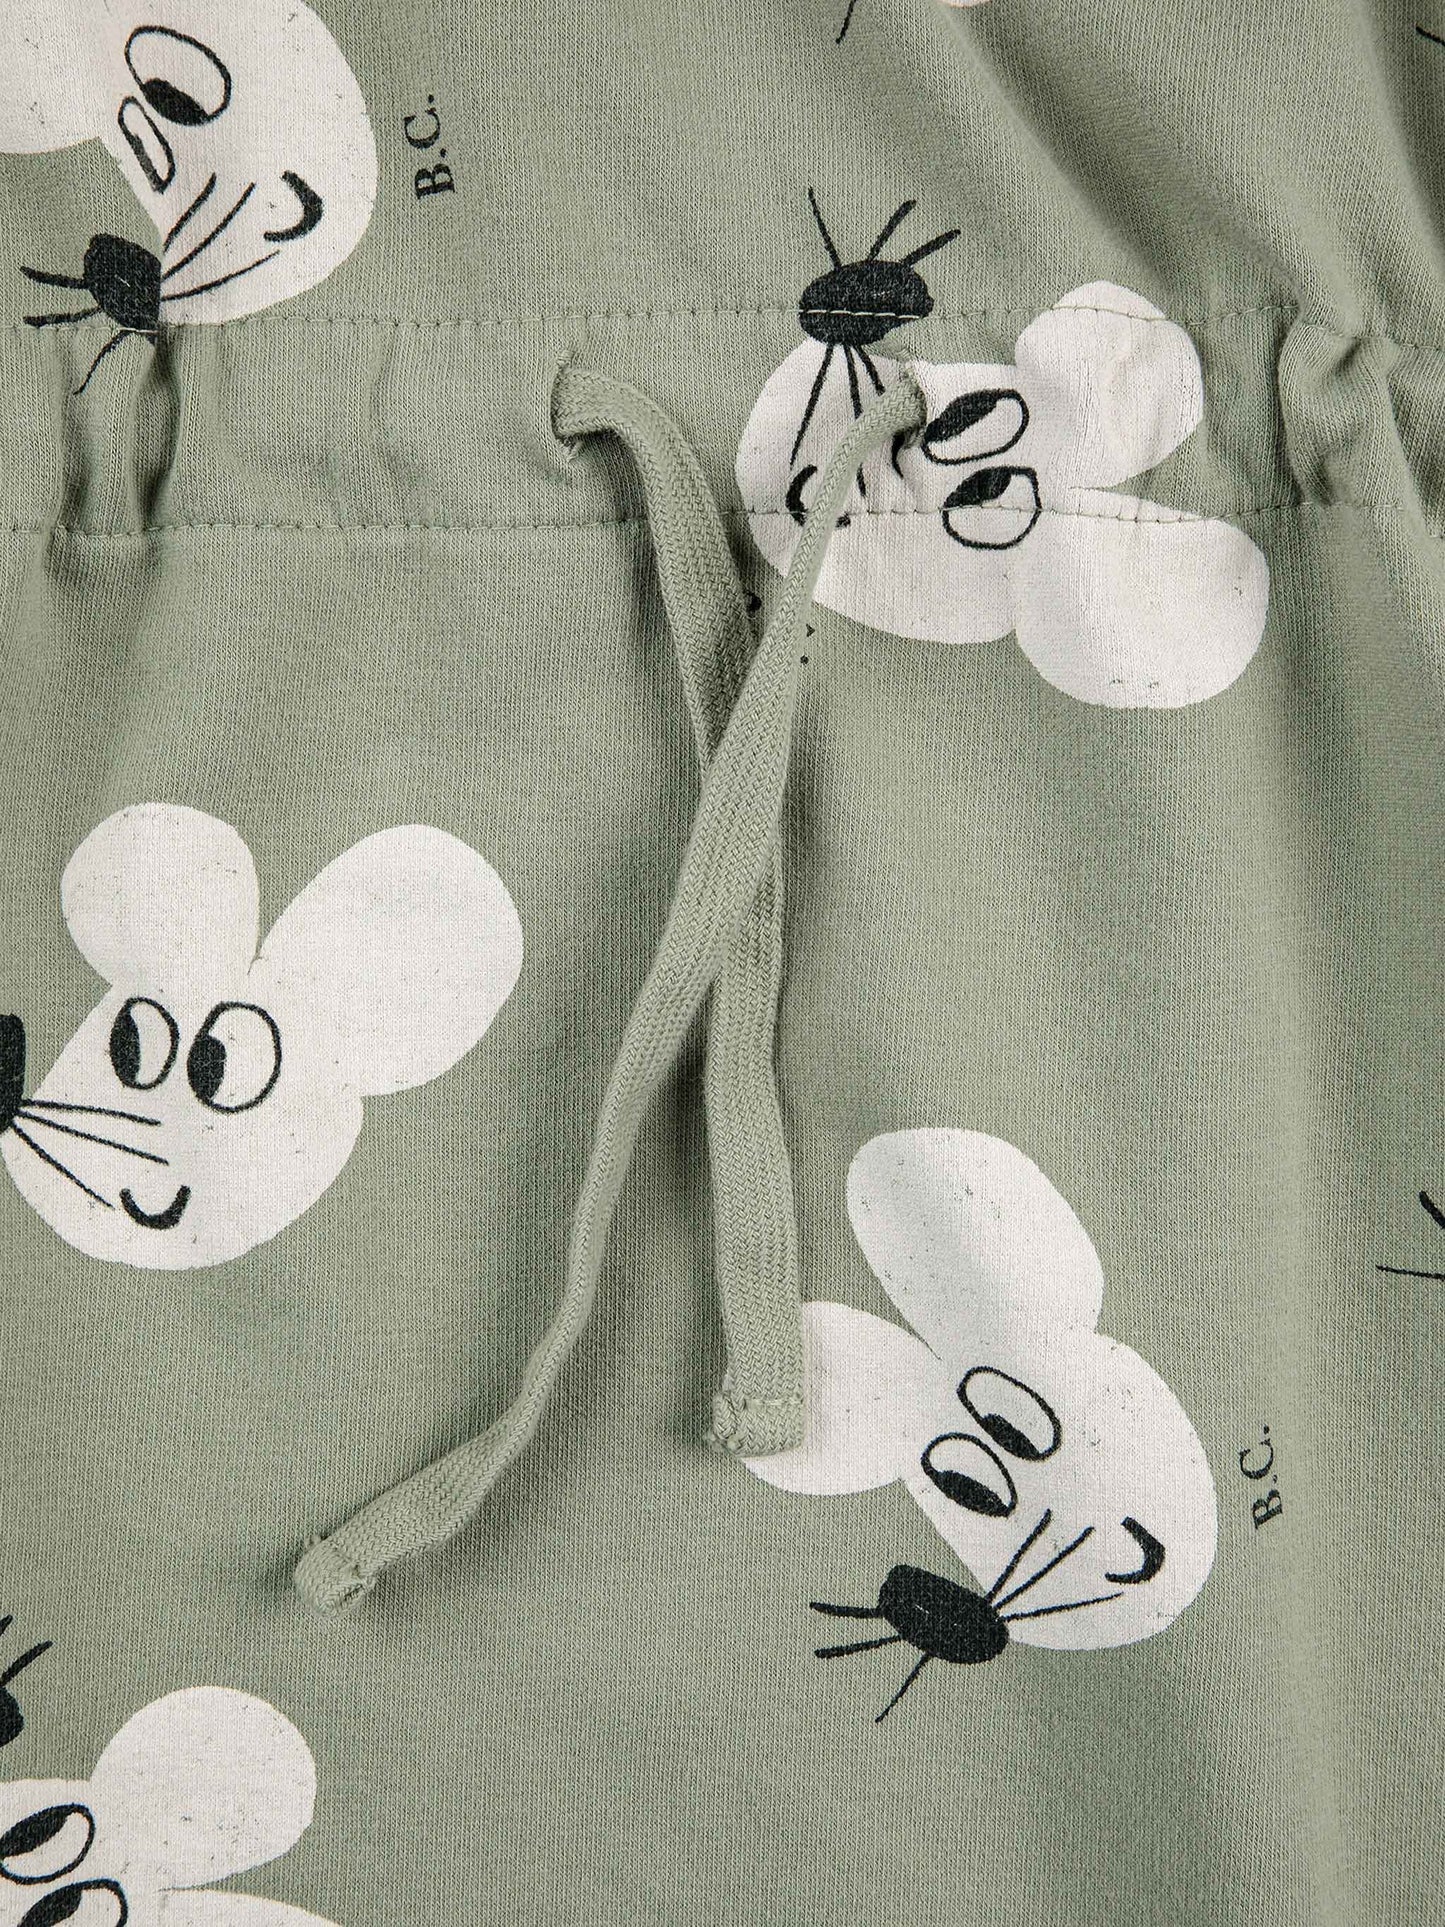 Mouse all over dress